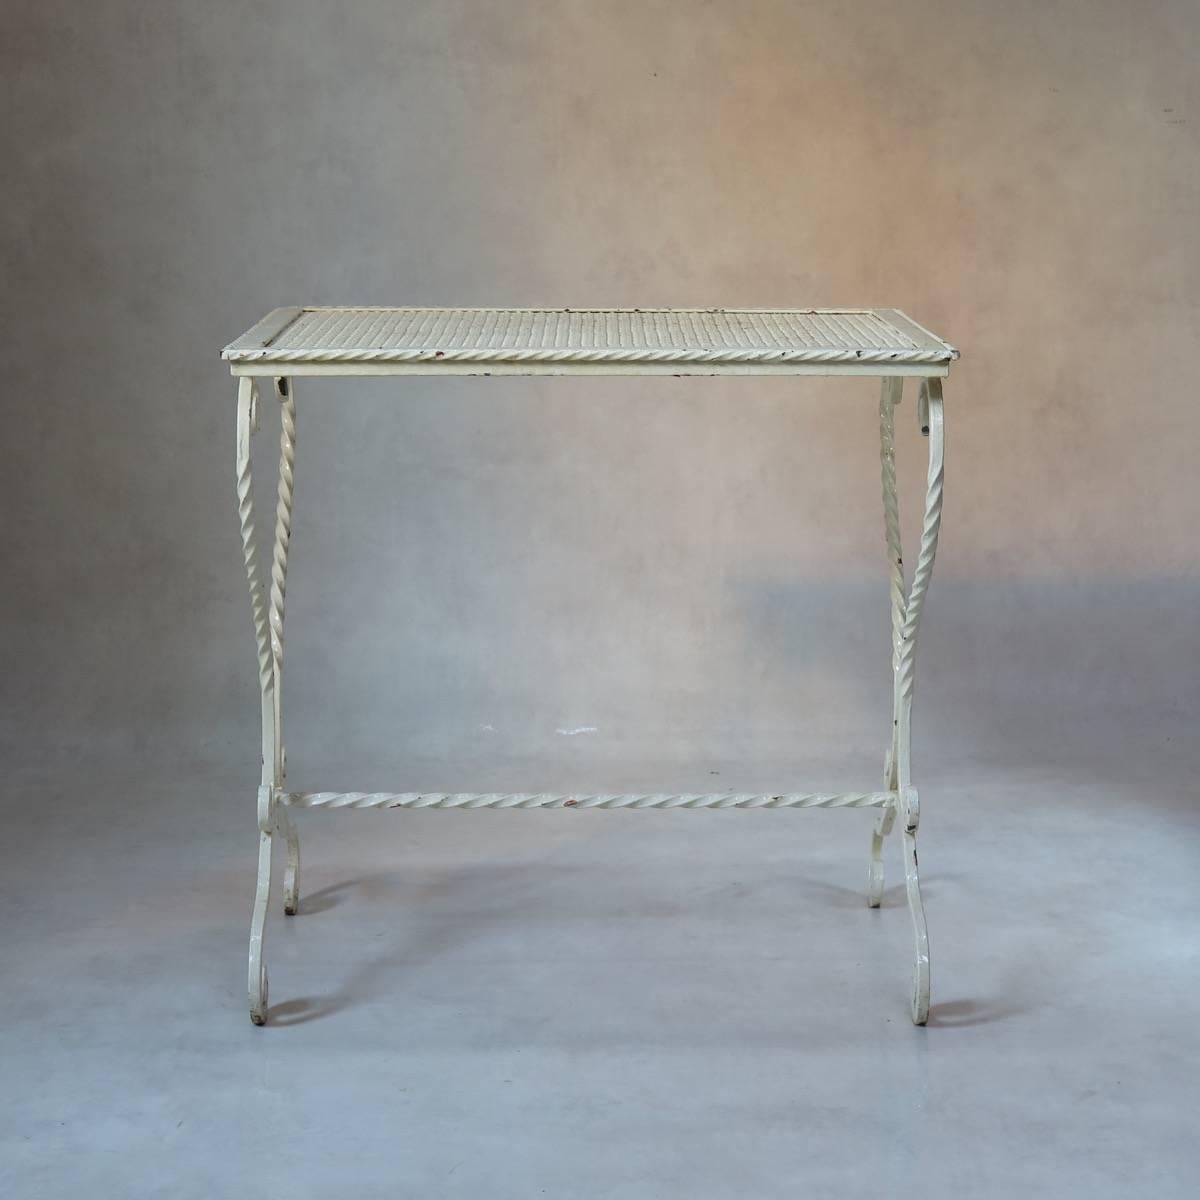 Painted wrought iron garden table with a cloverleaf-patterned top with a twisted iron surround and an elegant scrolled base.